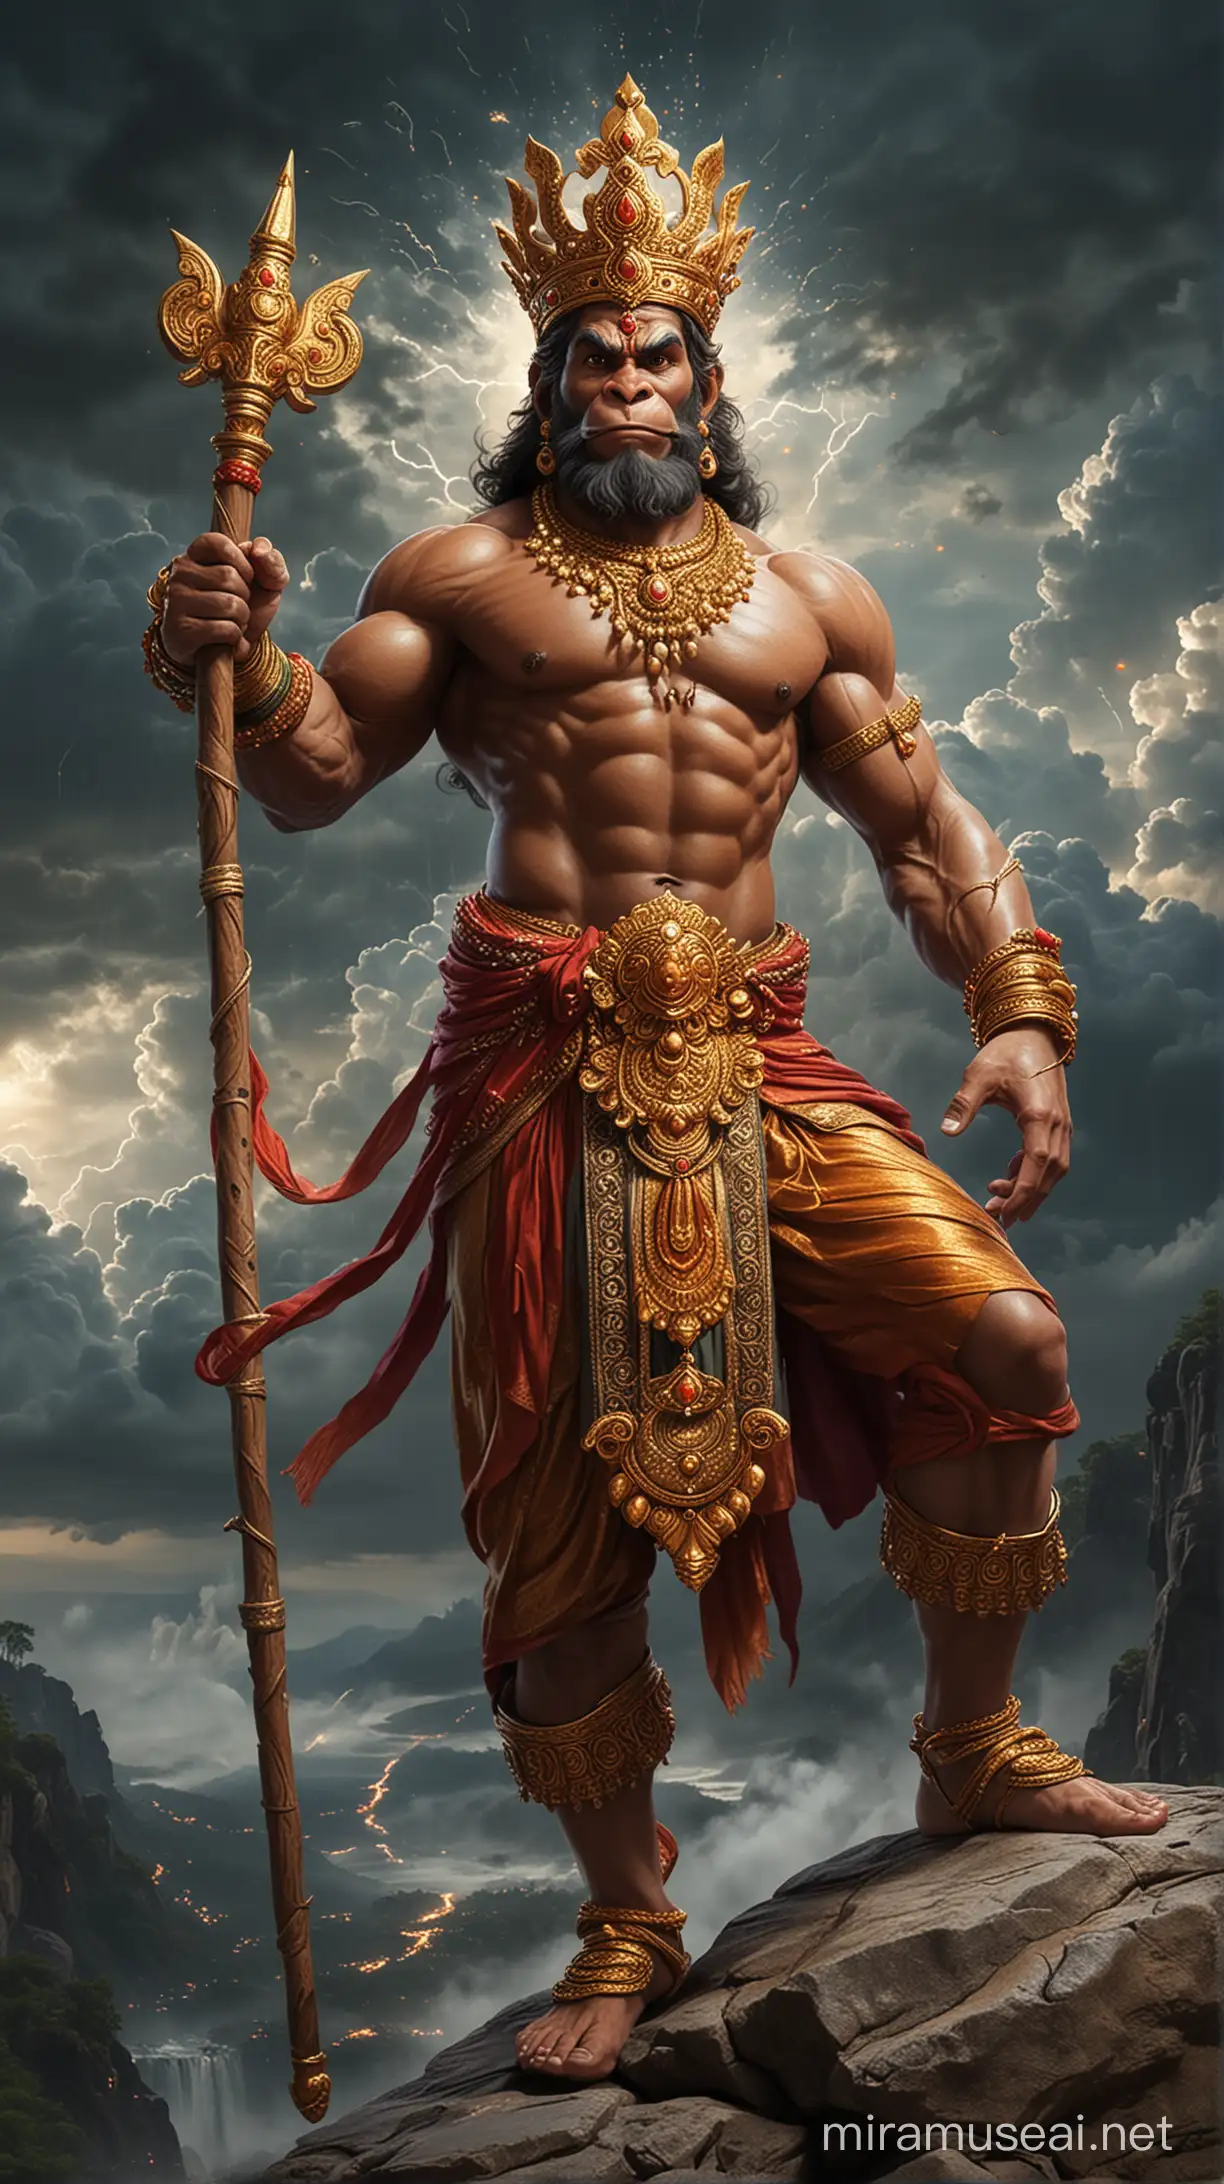 God Hanuman very muscular, tall, godly face, holding a huge Golden mace bomb in right hand pointing to the sky, wearing crown, standing on a hill top, one leg stepping on a big rock, battle field in the background, detailed and intricate environment, dynamic pose, muscles defined with chiseled aesthetics, traditional attire draped elegantly, vivid, ultra realistic.
Hanuman's face is depicted glowing with a divine radiance, symbolizing his divine nature and spiritual power. His aura signifies his purity, courage, and divine protection.
Hanuman is shown wearing a crown or headgear adorned with jewels, symbolizing his royal lineage and divine status as a deity.
Hanuman's face embodies a combination of strength, wisdom, devotion, and compassion.

Thunders roar and lightning dances in the sky, painting it with wild, vibrant colors. Each bolt of electricity illuminates the darkness, revealing the intricate patterns of clouds swirling like celestial brushstrokes. The rumble of thunder echoes through the air, shaking the earth beneath with its power. Nature's own fireworks display, a spectacle both awe-inspiring and humbling, as if the sky itself has come alive with energy and passion. 